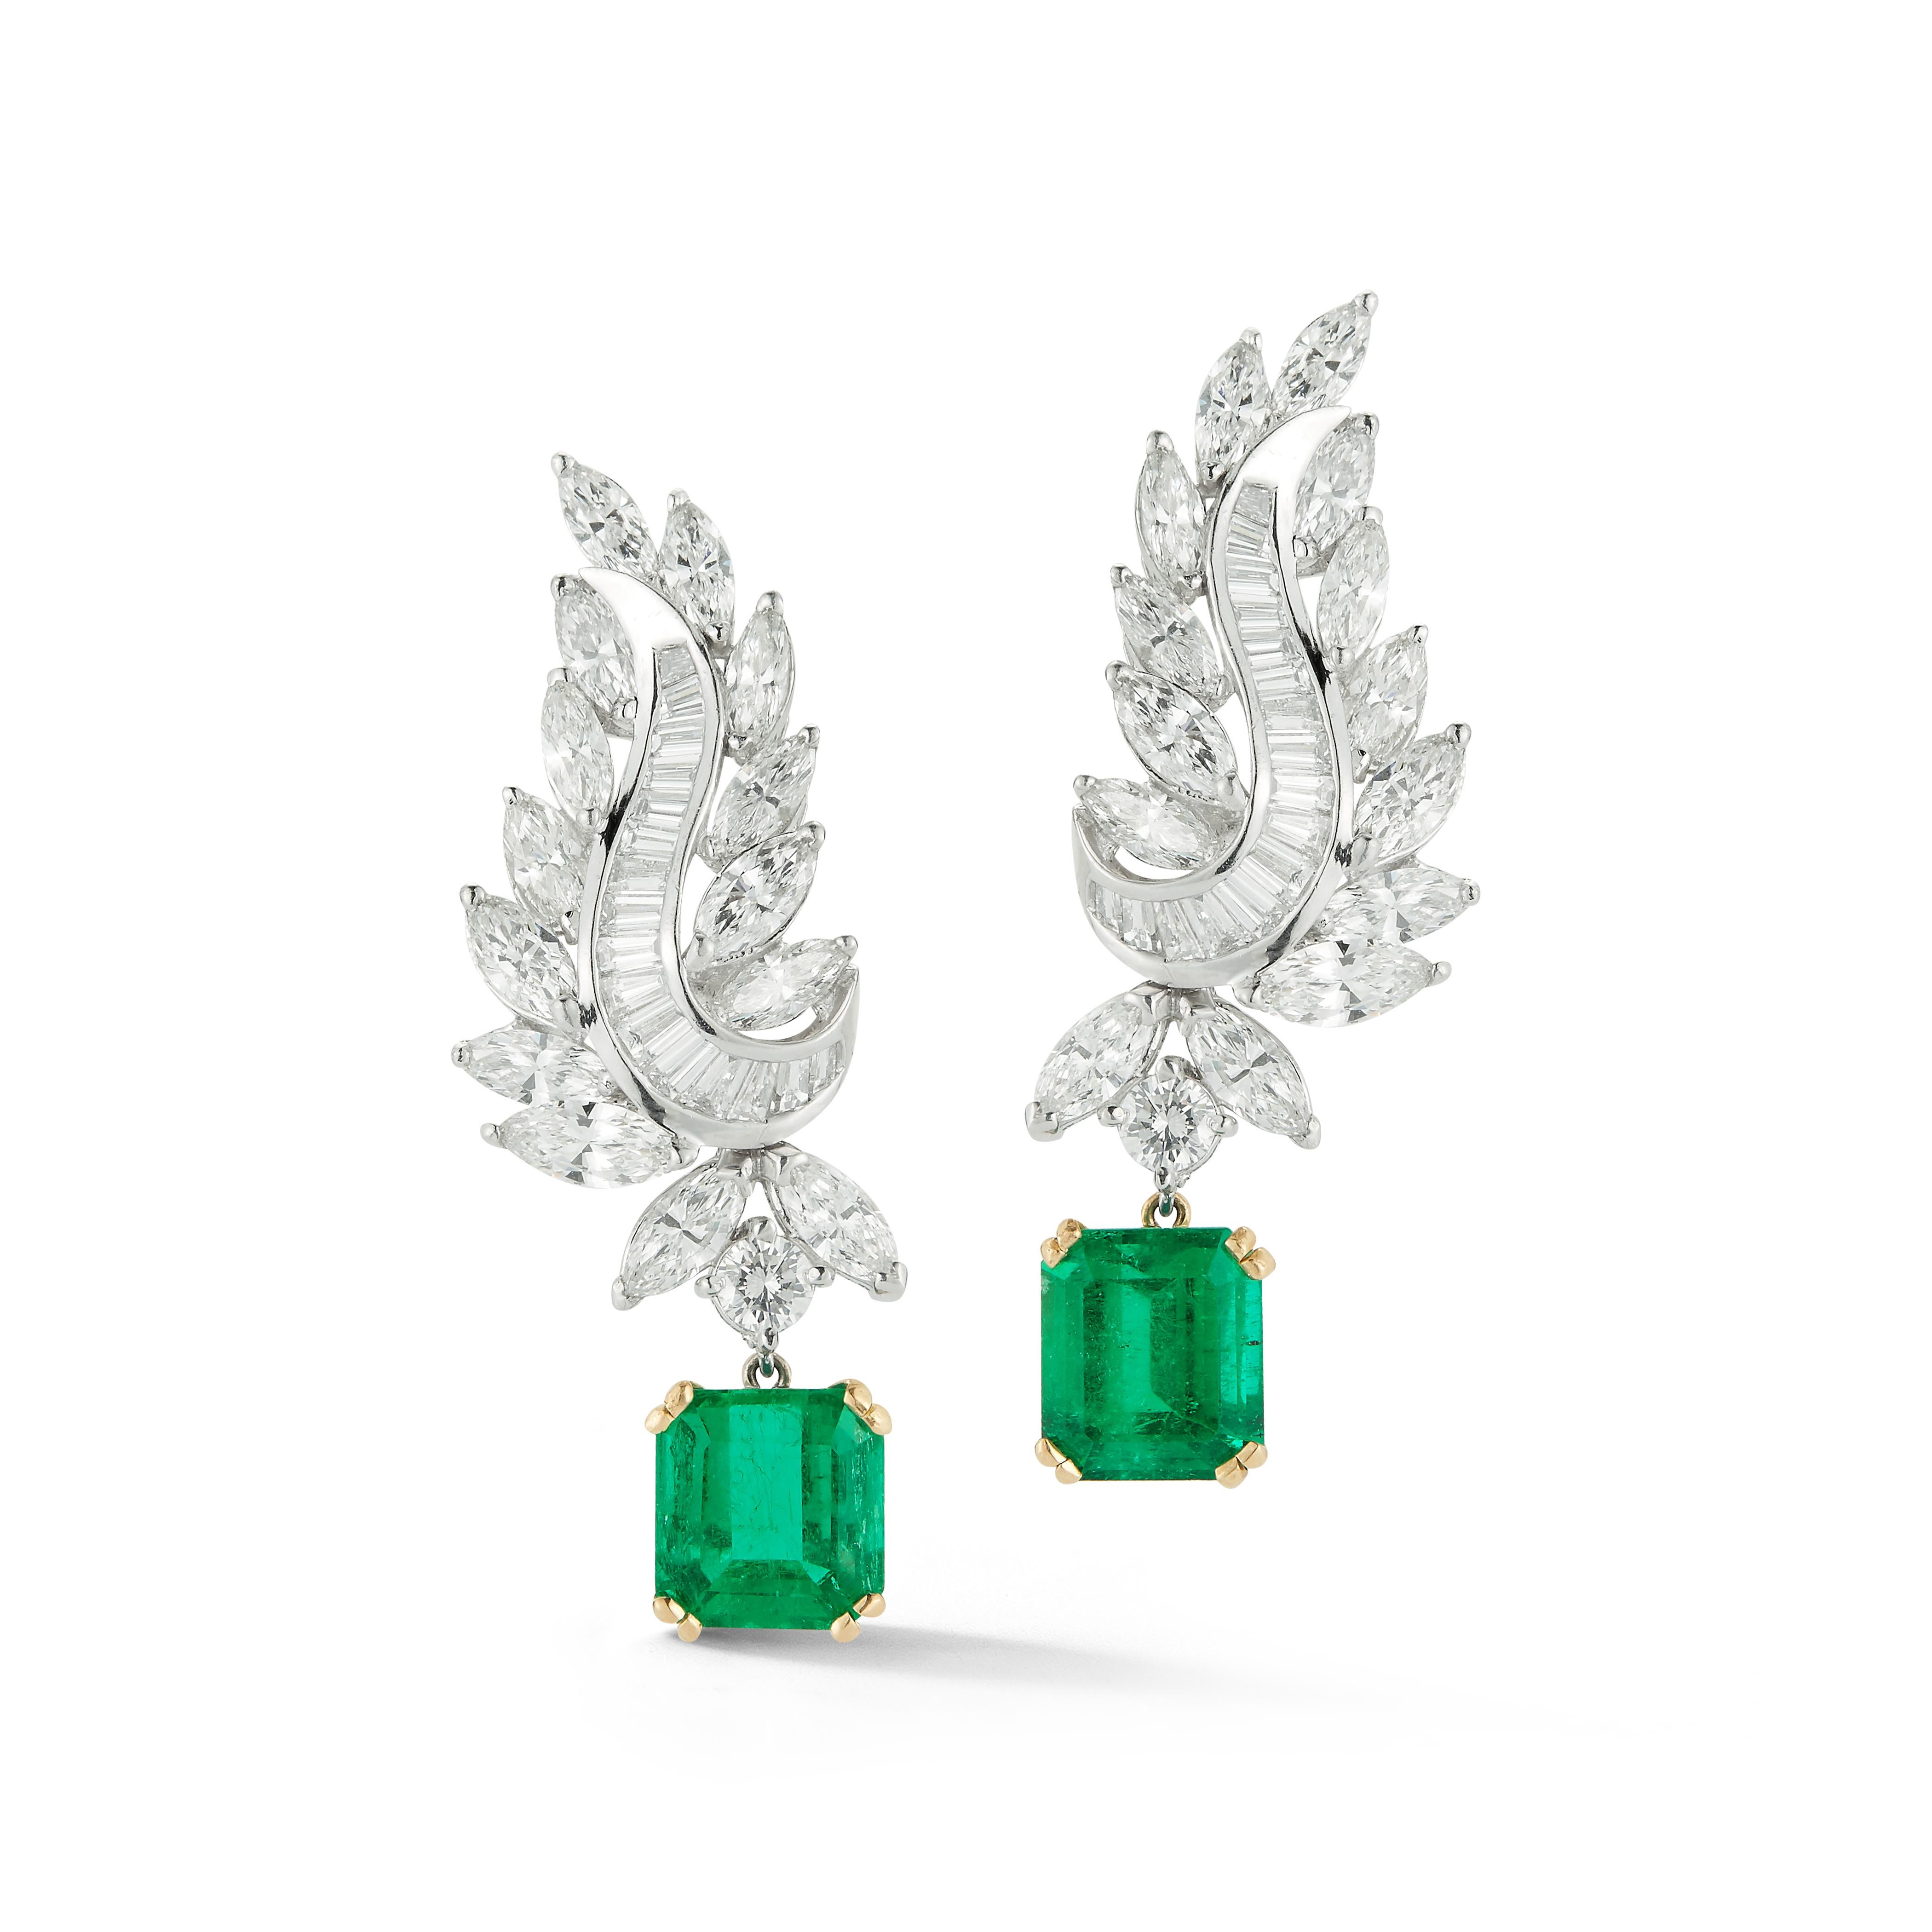 Certified Emerald & Diamond Day & Night Earrings, set in Platinum & 18K White & Yellow Gold AGL Certified
Detachable Emerald drops 
Emerald Weight: 4.10 Cts & 3.66 Cts 
Diamond Weight: 7.05 Cts 
Back Type: post with clip on
Length: 1.5 inches
